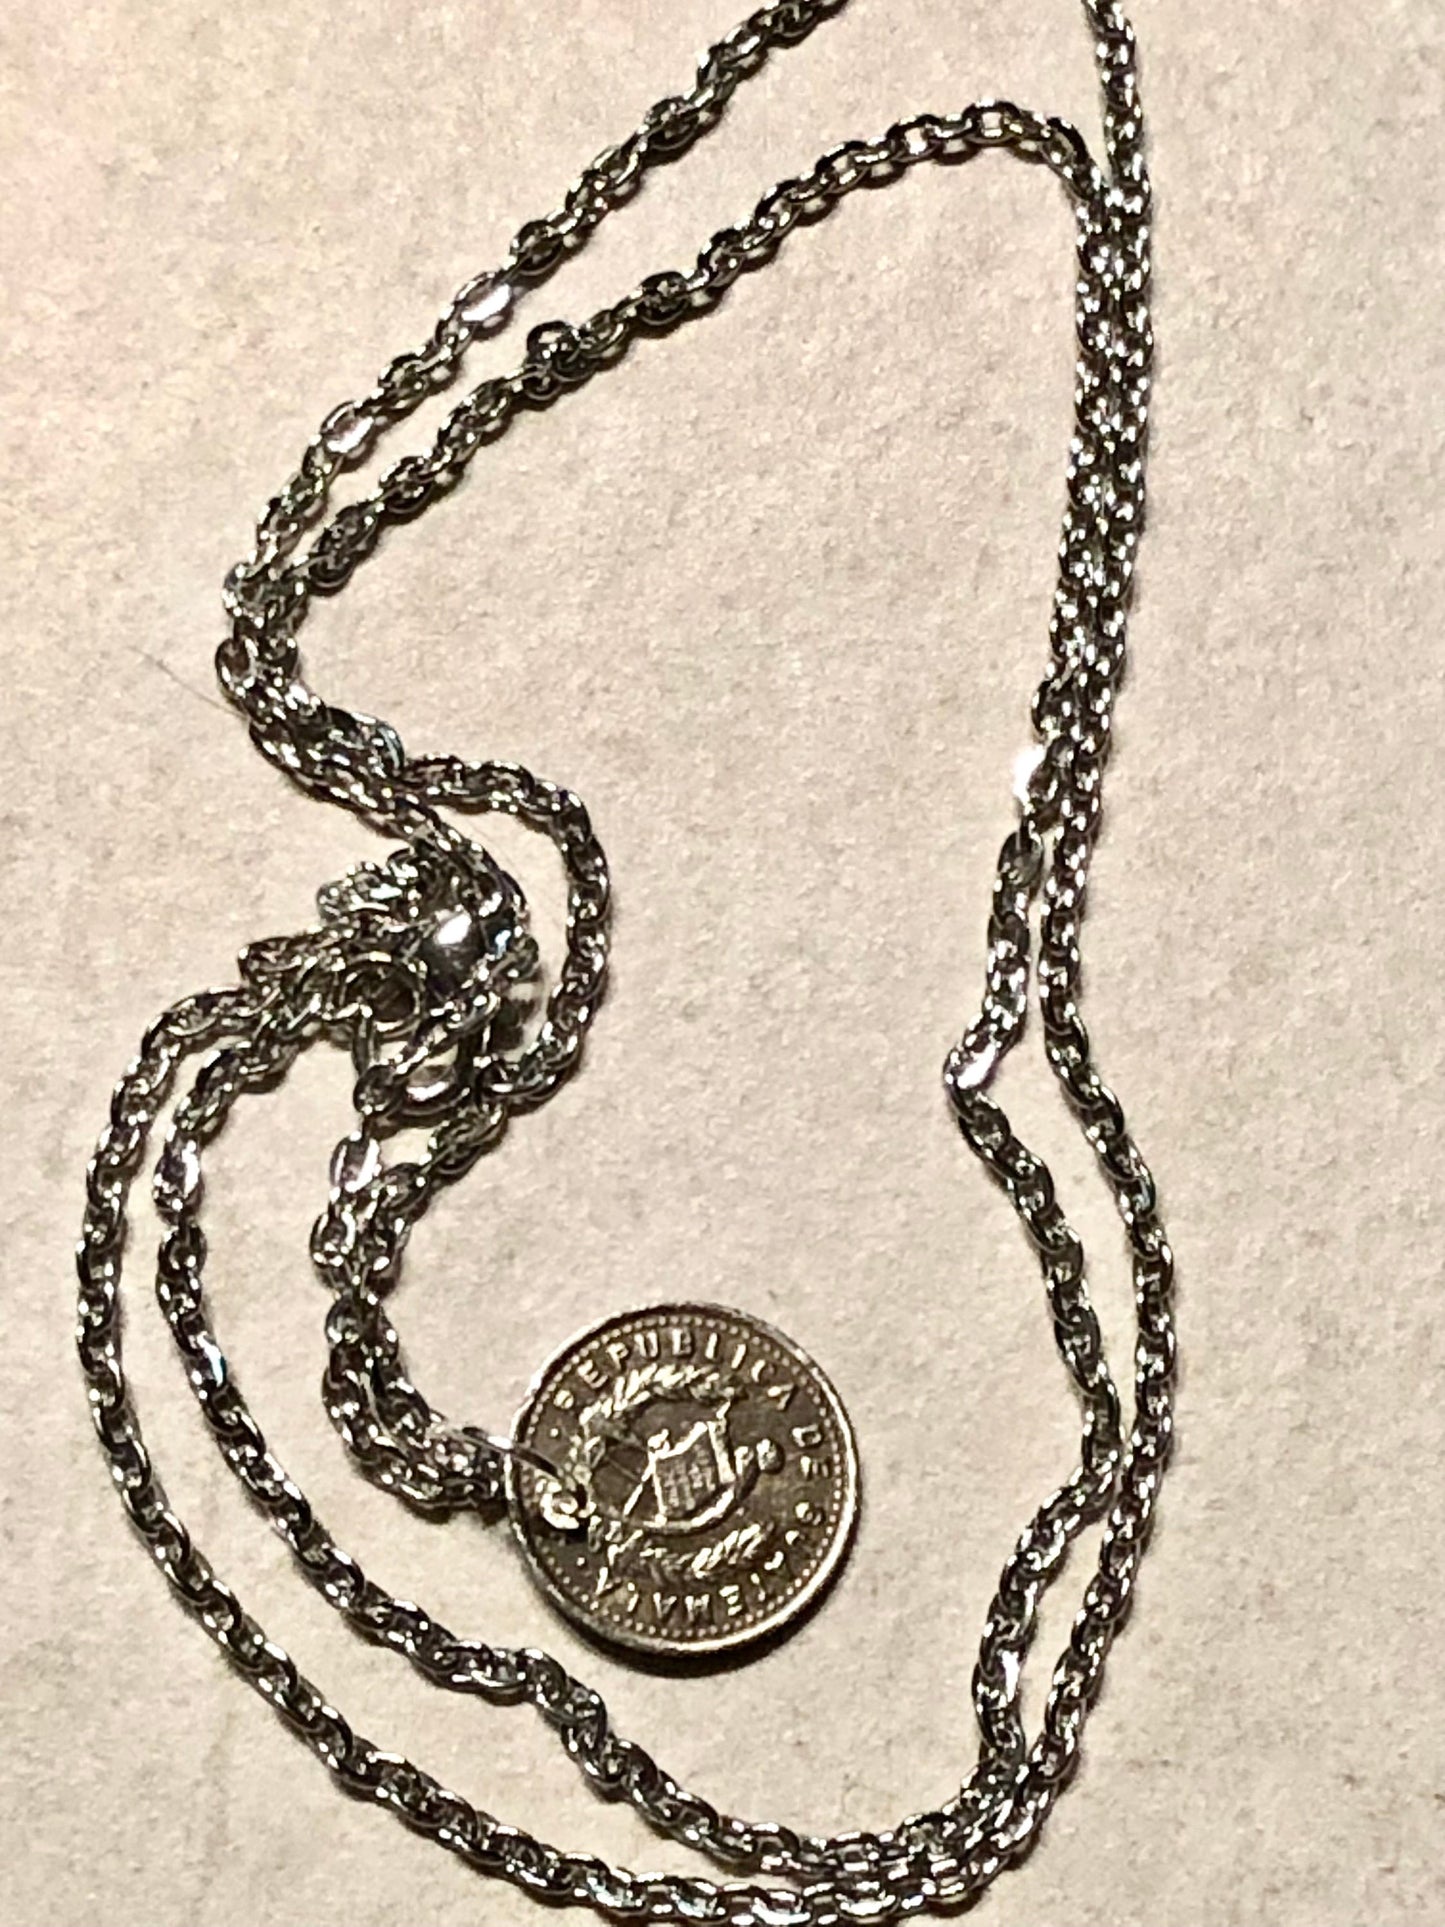 Guatemala Coin Necklace Five Centavo Coin Pendant Jewelry Custom Made Vintage and Rare coins - Coin Enthusiast Fashion Accessory Handmade